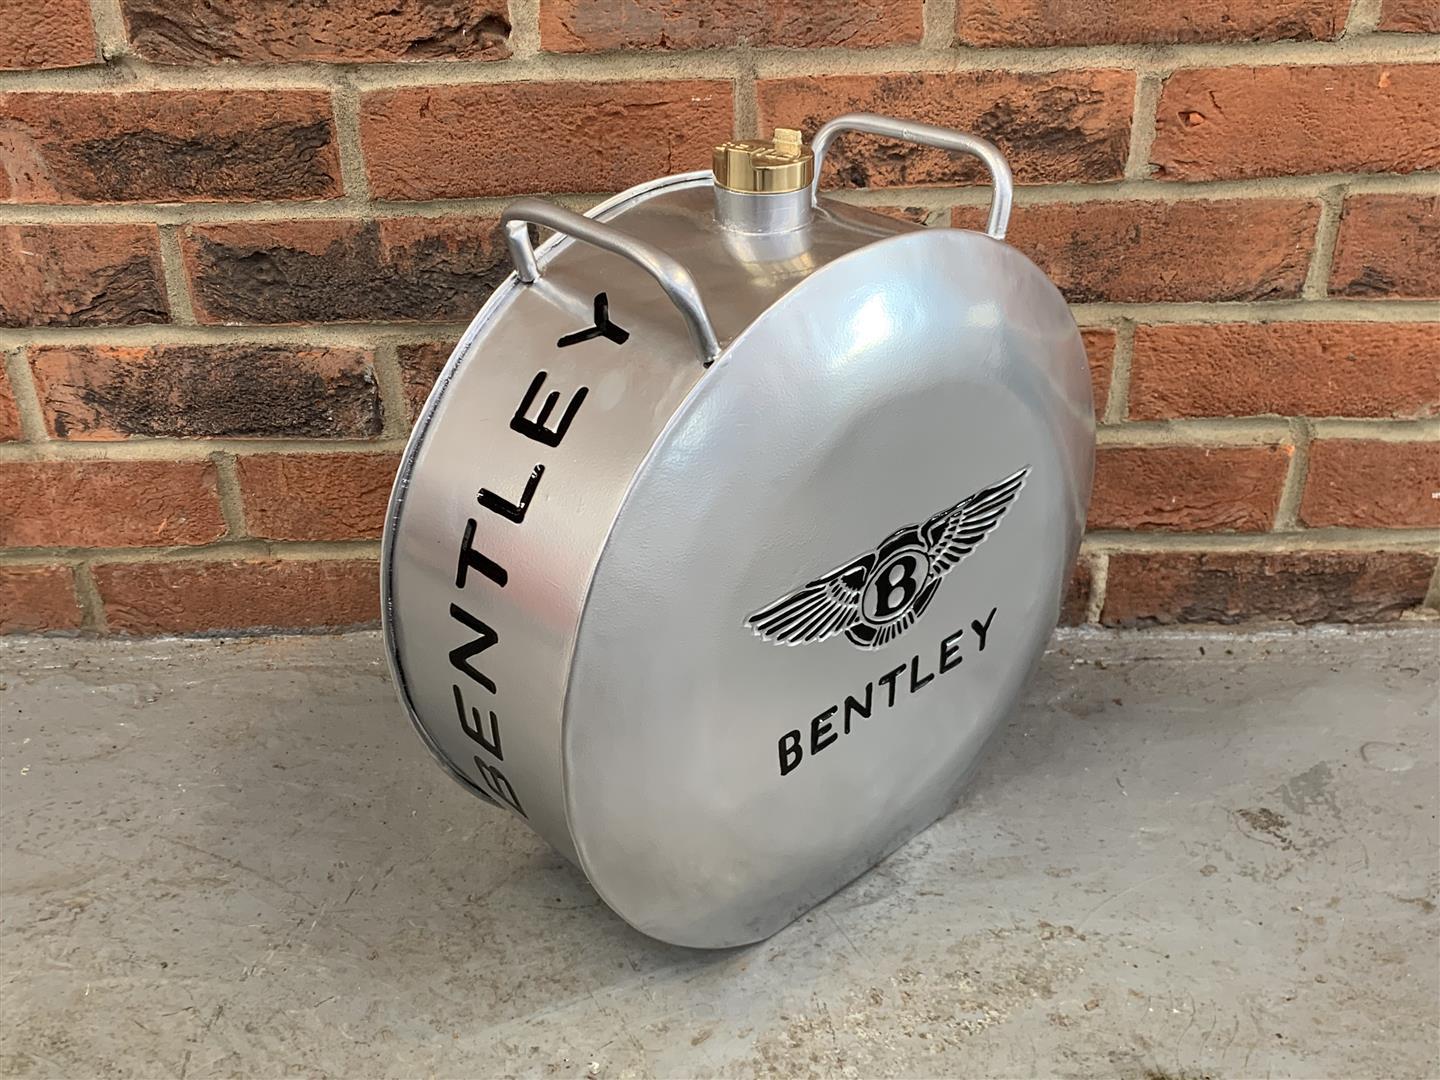 Modern Bentley Two Handled Fuel Can - Image 2 of 2